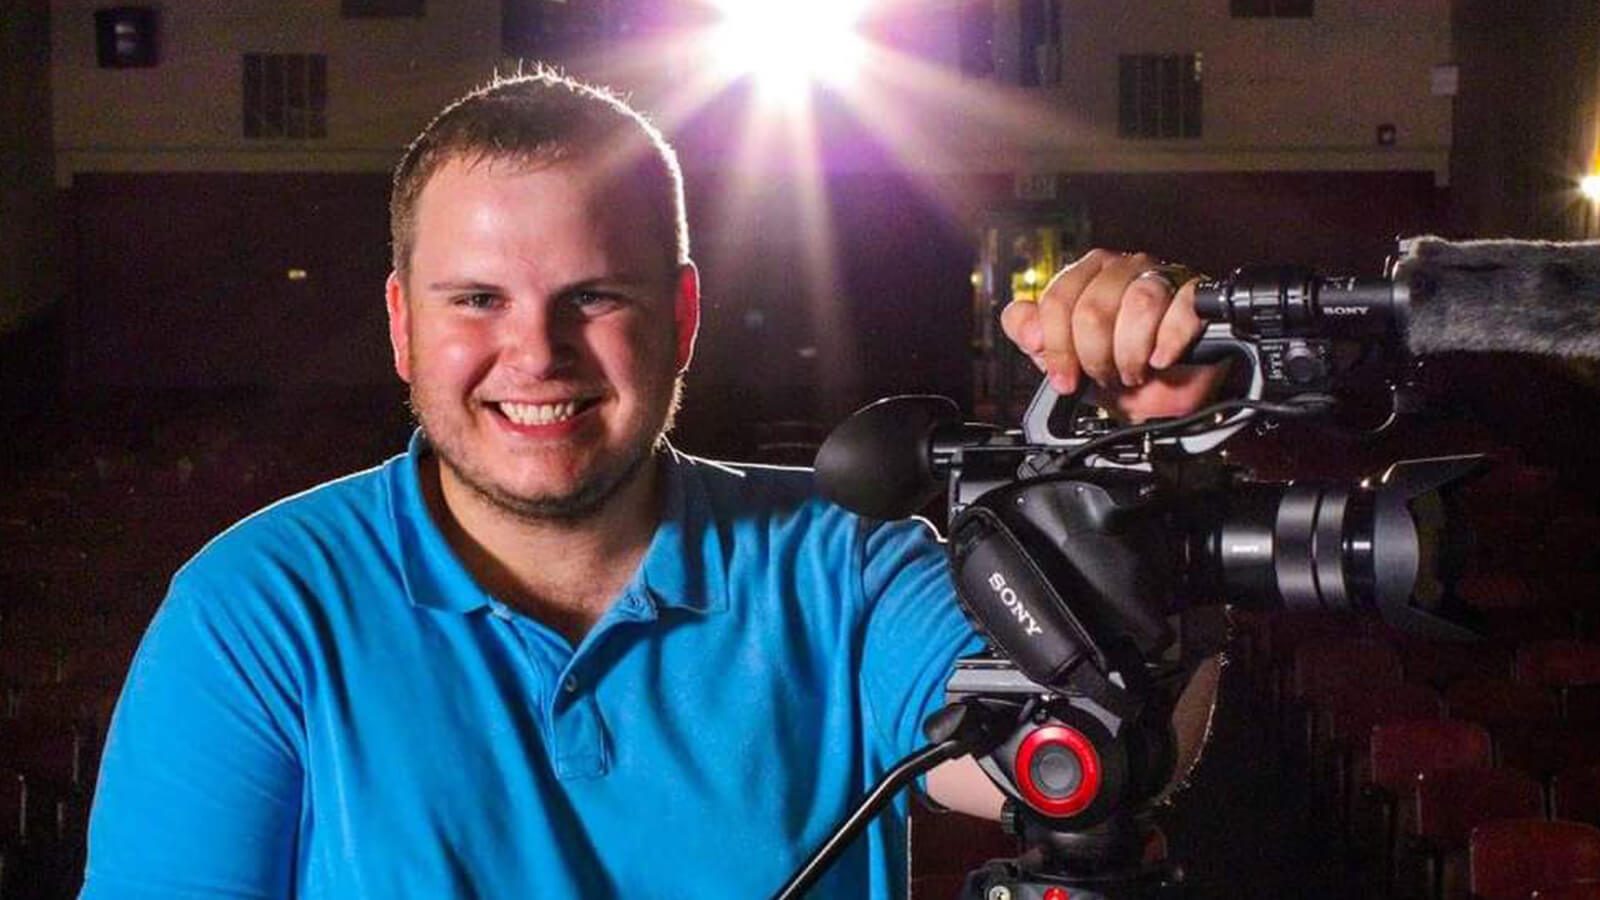 Grad Cody Grammer in a blue collared shirt, holding a video camera in a movie theater.